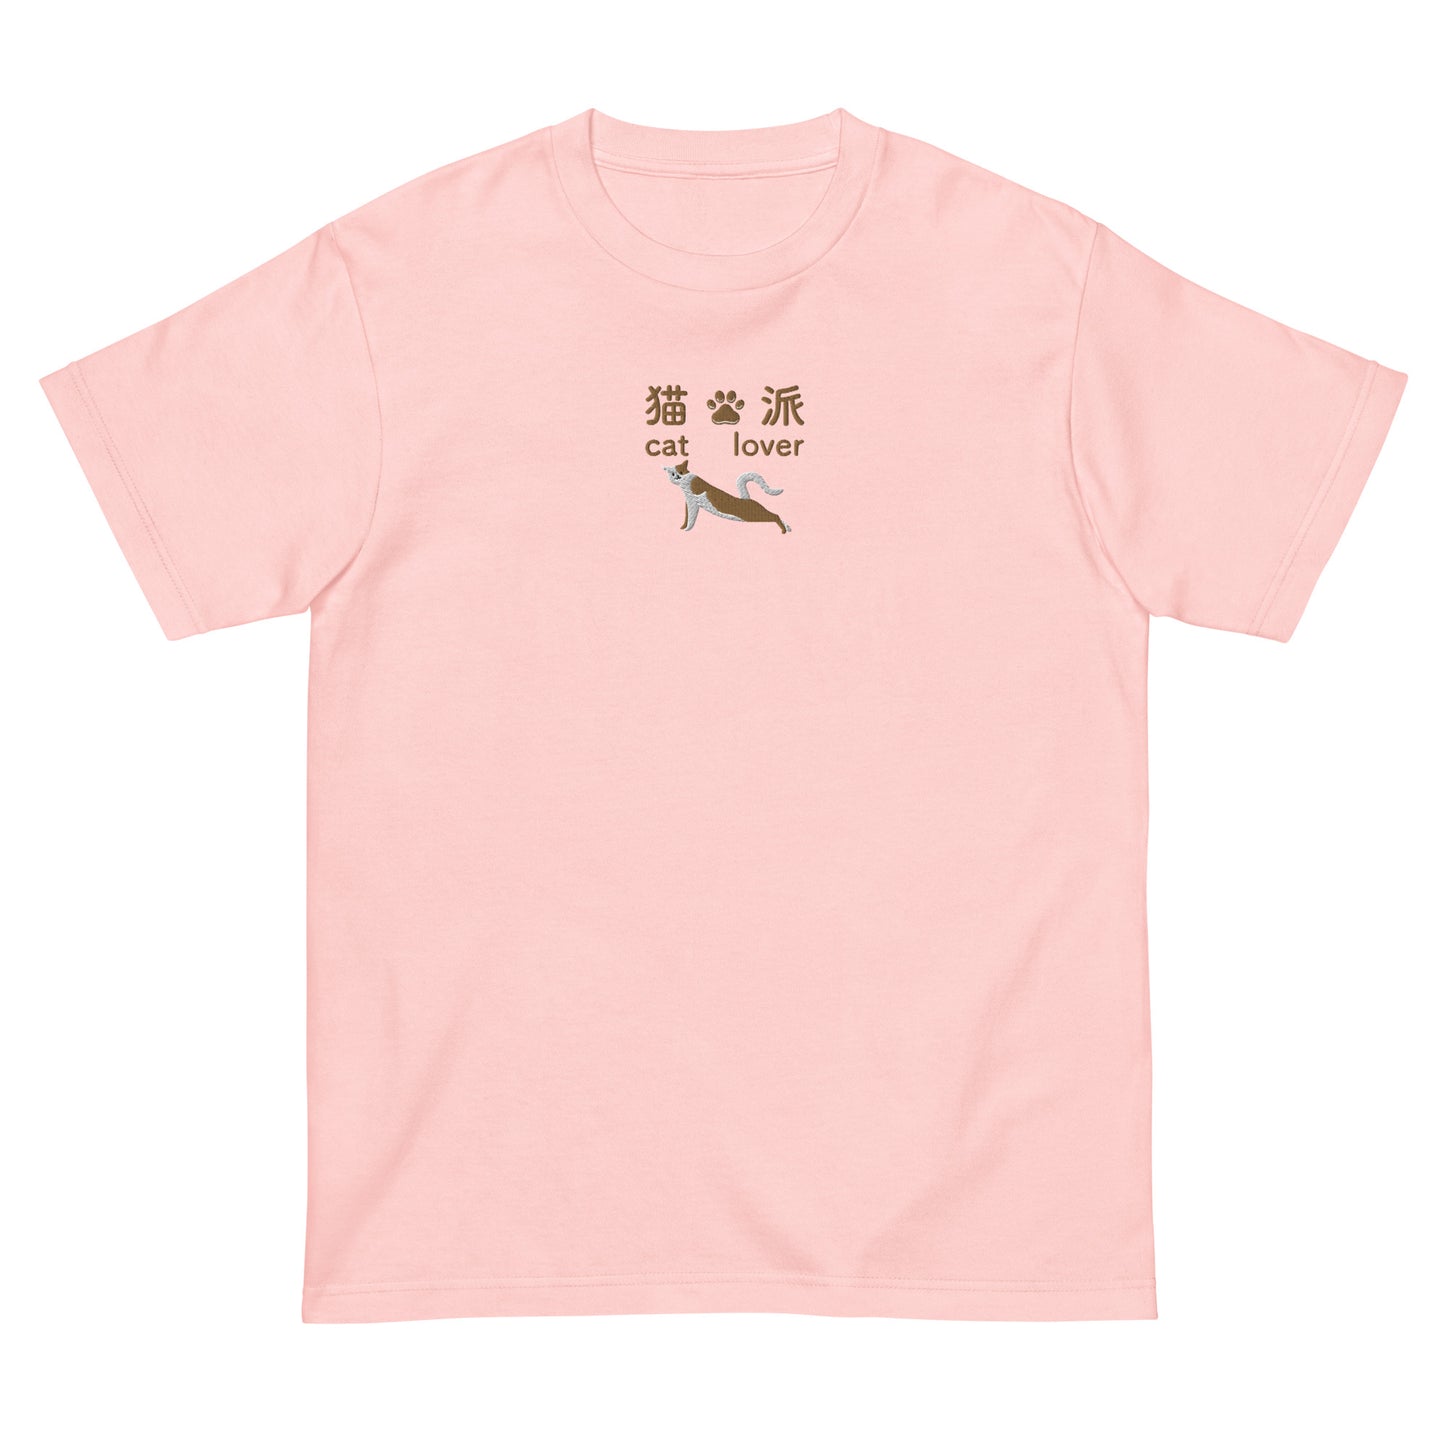 Pink High Quality Tee - Front Design with an Brown, White Embroidery "Cat Lover" in Japanese,Chinese and English, and Cat  Embroidery 